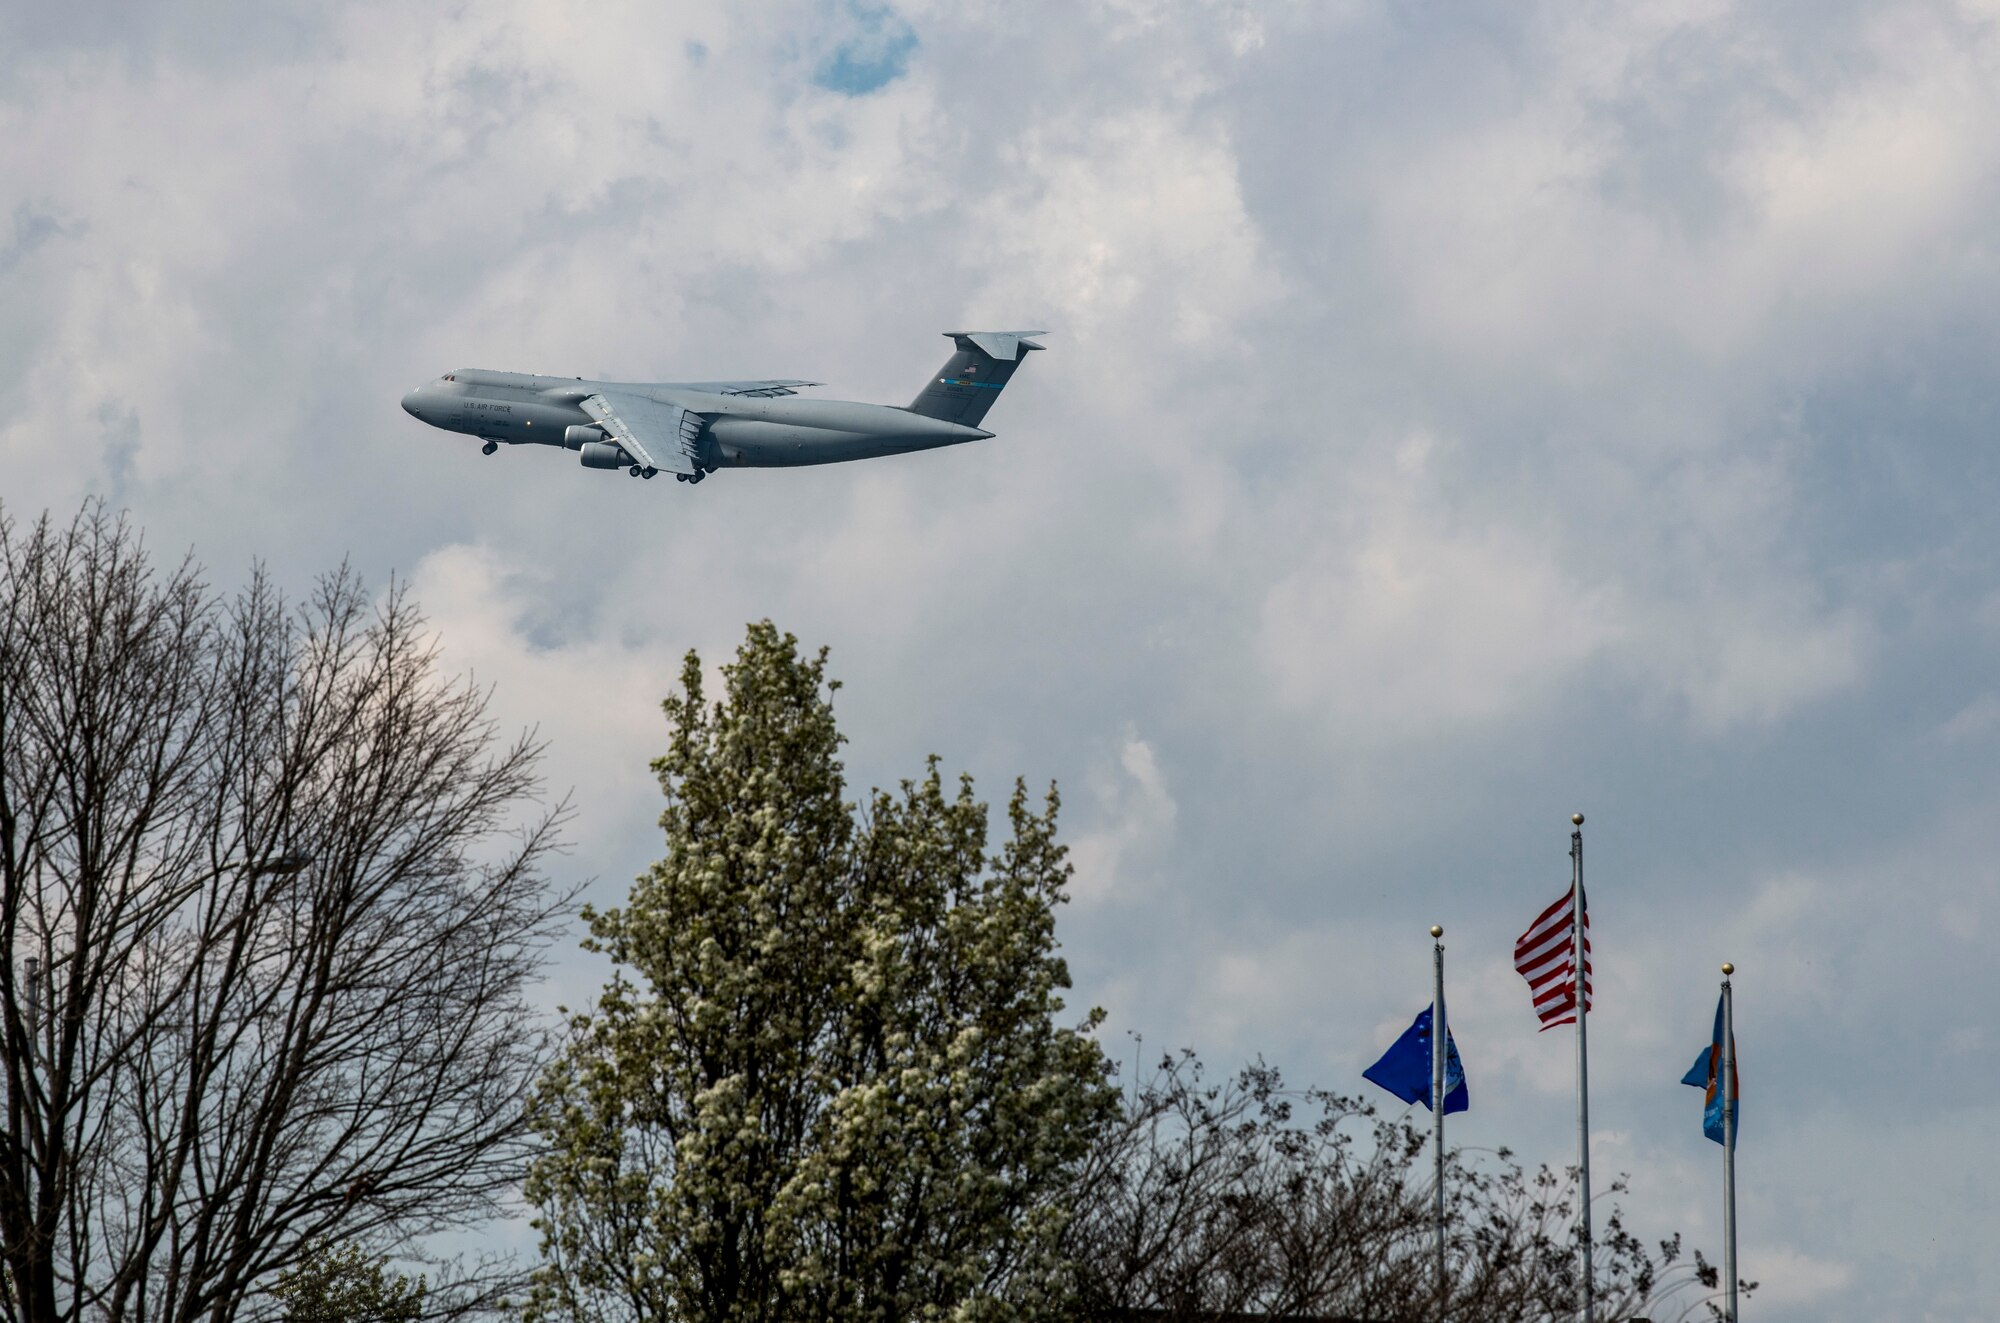 A Dover C-5M Super Galaxy flies over Dover Air Force Base, Delaware, March 30, 2020. Despite the COVID-19 pandemic and significantly reduced manning, aircrews continue to fly in support of global and national response efforts. (U.S. Air Force photo by Senior Airman Christopher Quail)